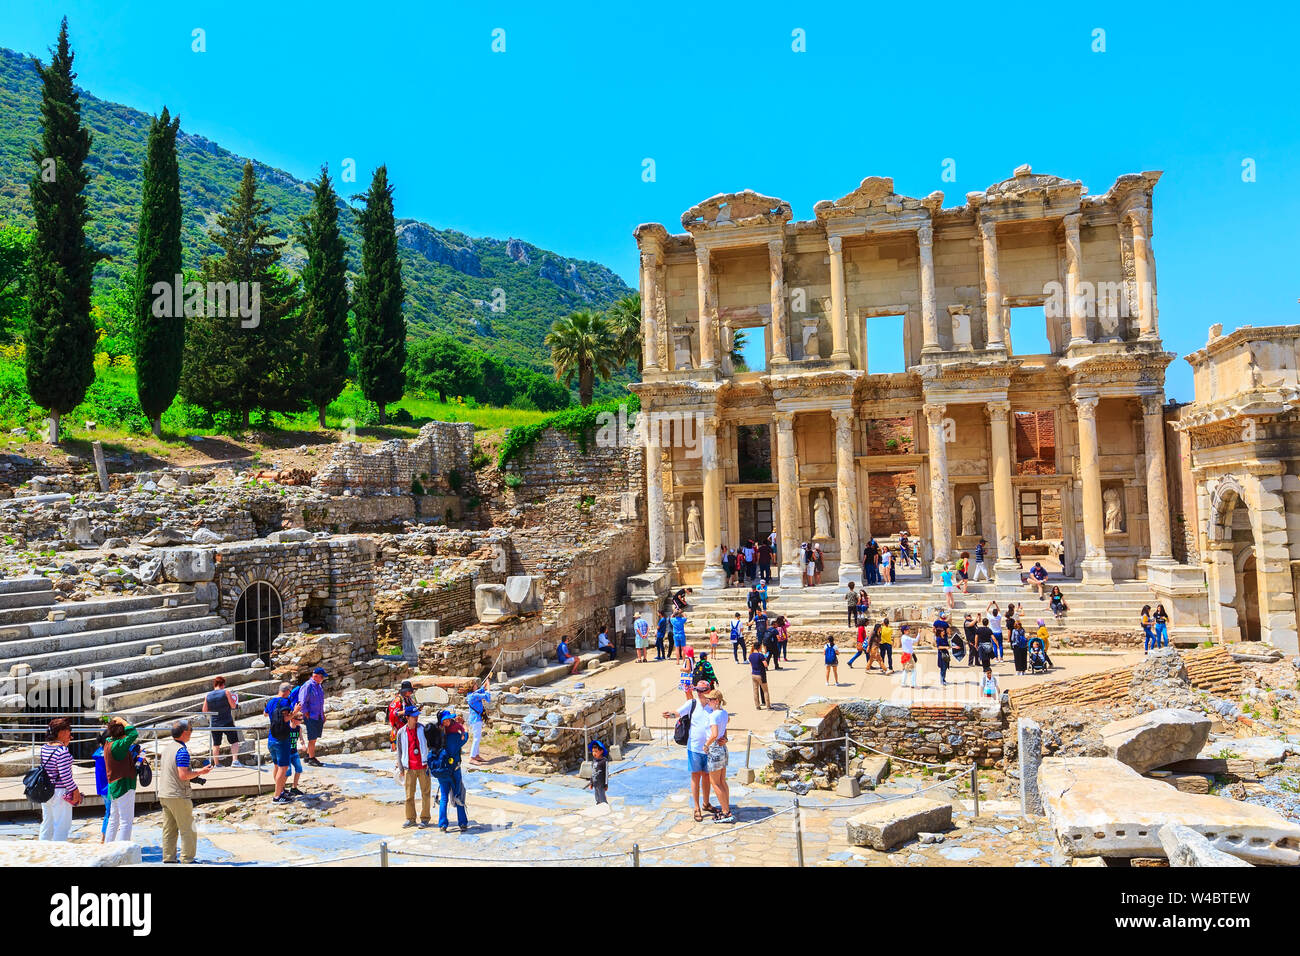 Kusadasi, Turkey - April 28, 2019: People visiting Celsus Library and old ruins of Ephesus or Efes famous site Stock Photo